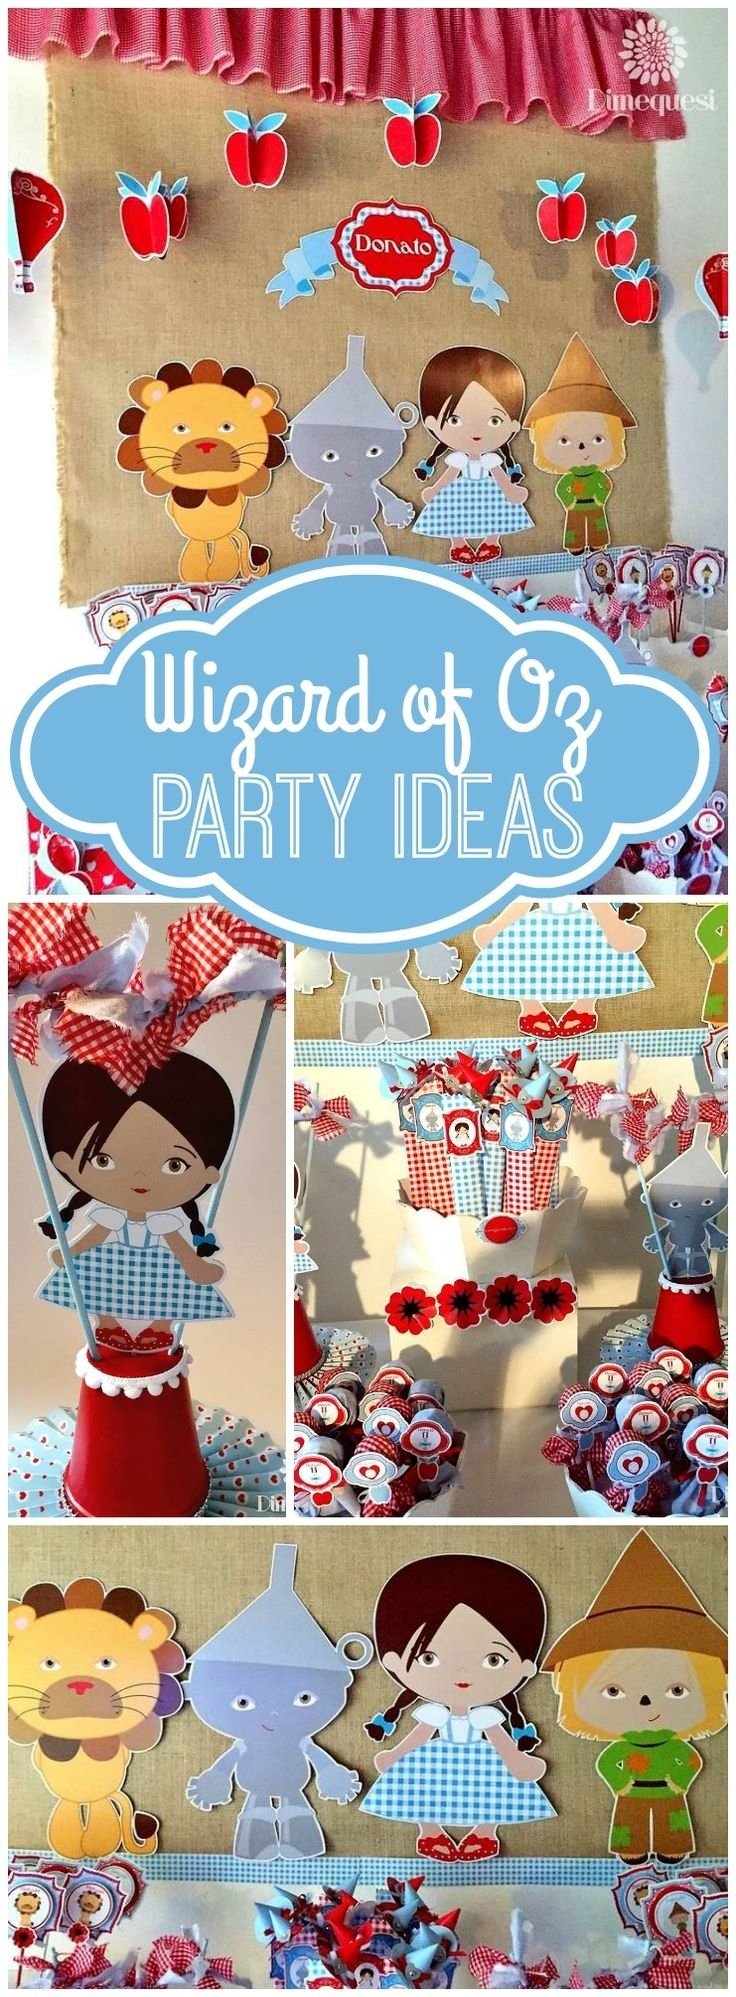 10 Lovely Wizard Of Oz Birthday Party Ideas 152 best wizard of oz party ideas images on pinterest wizard of oz 2022